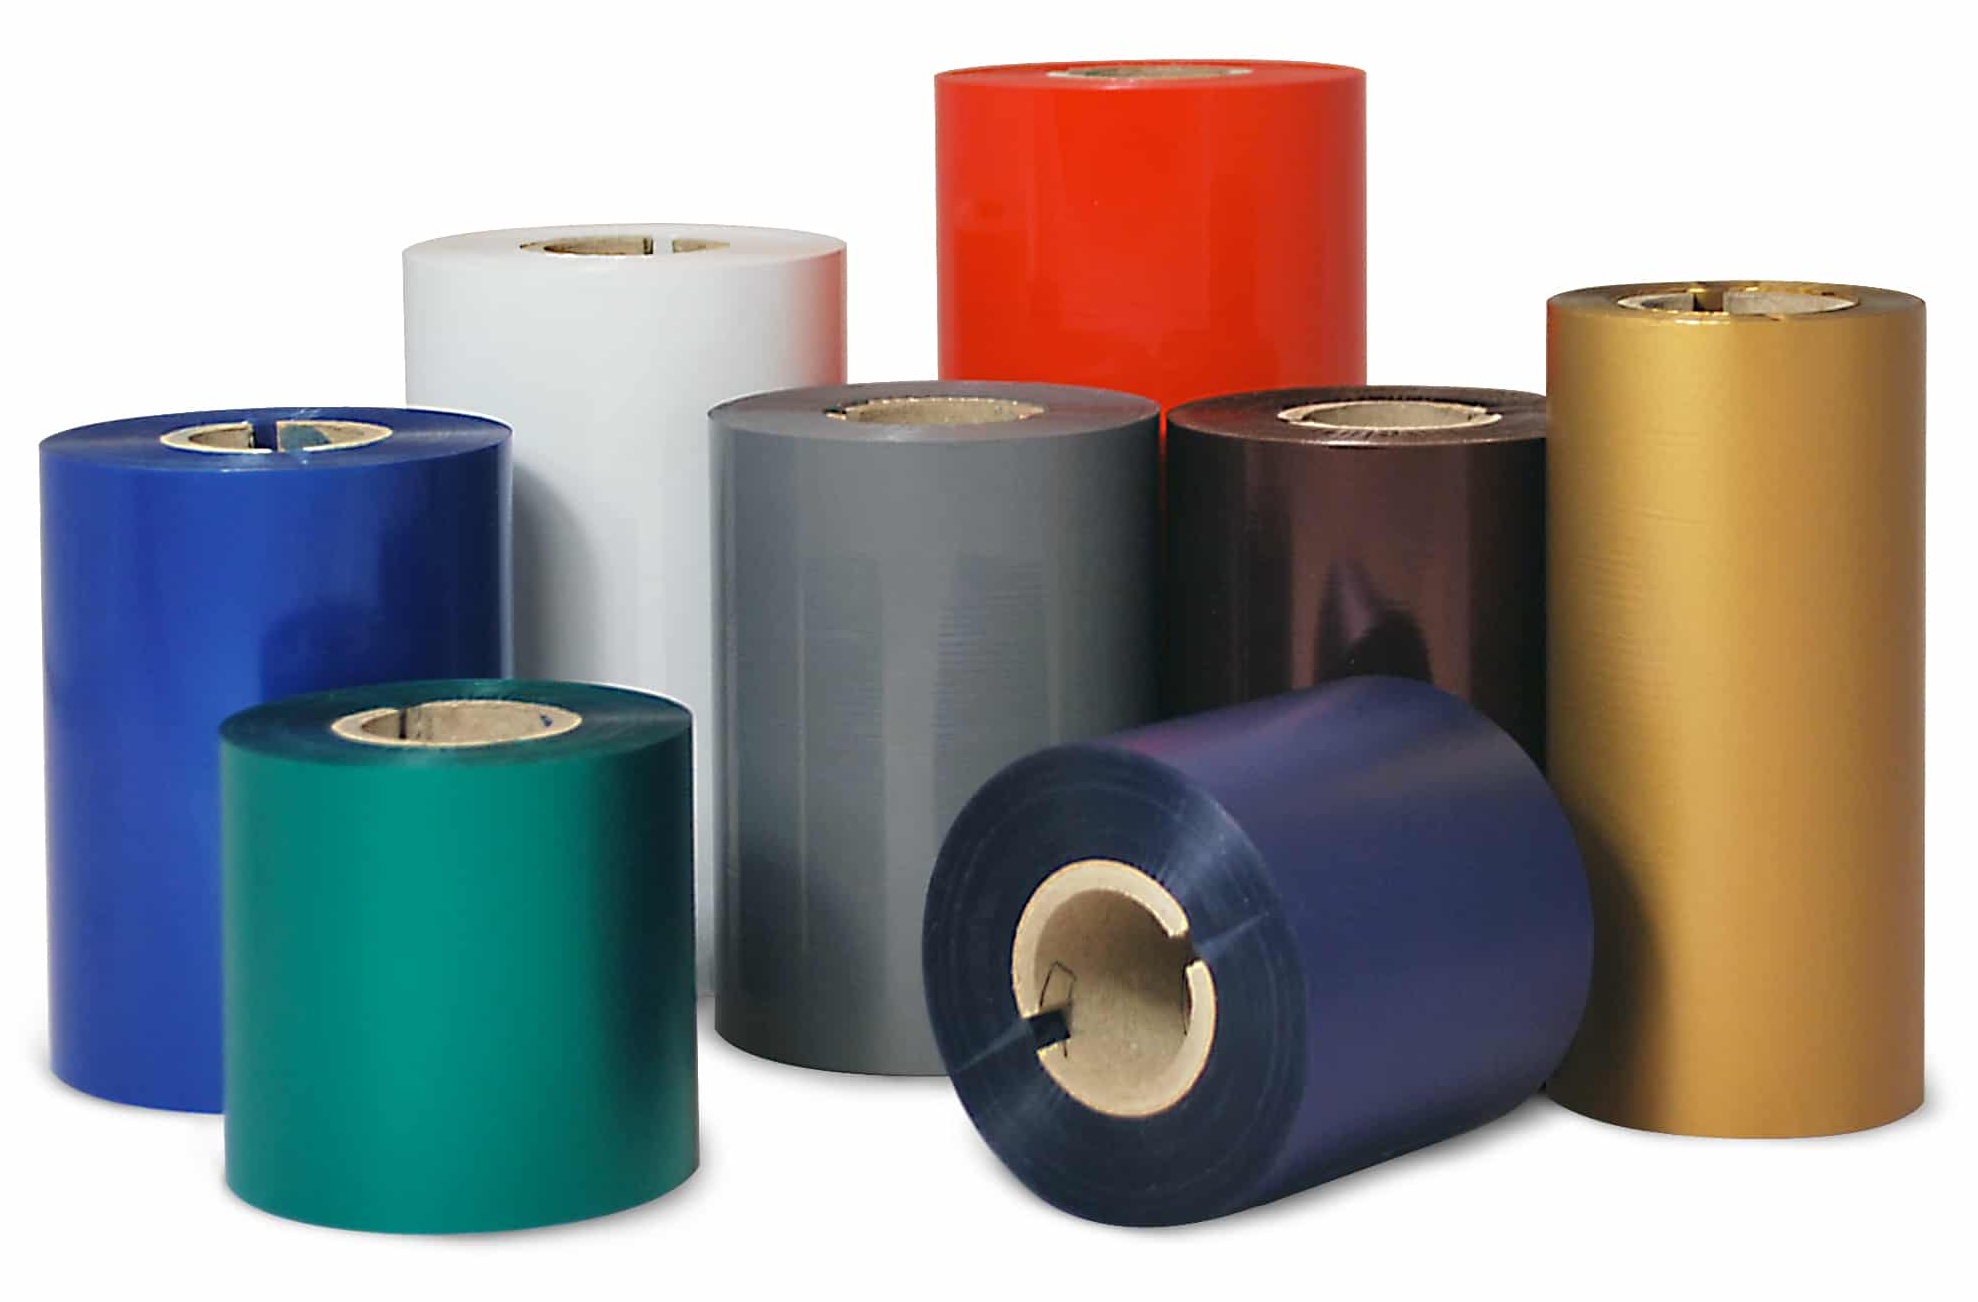 Armor Inkanto ATX7 Thermal Transfer Ribbon designed to print labels for textile products